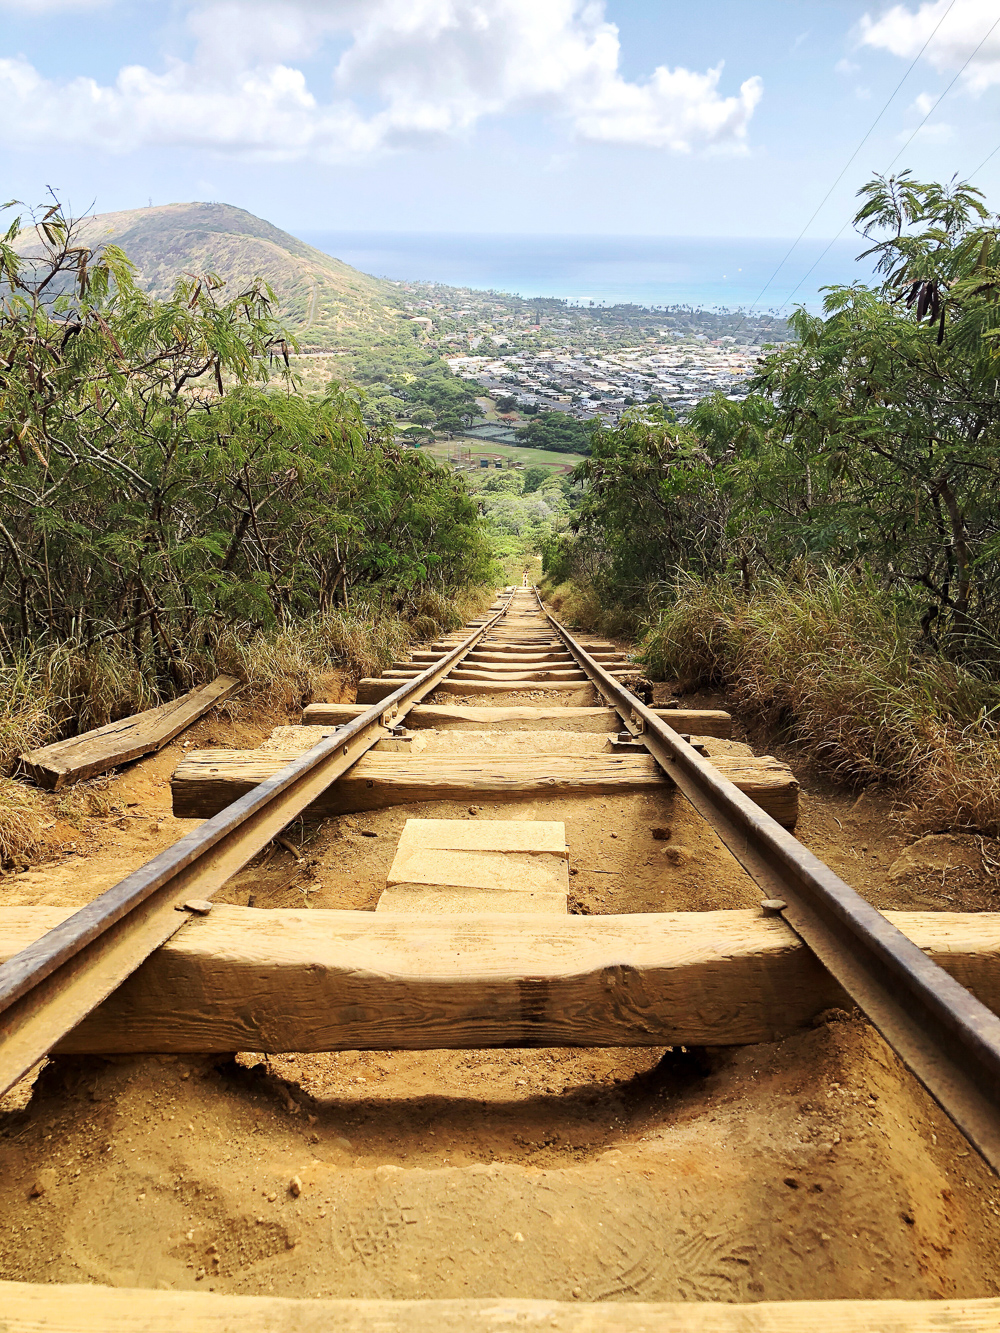 The Ultimate Oahu Travel Guide for the Adventurer - Koko Crater Railway | Sunshine Style